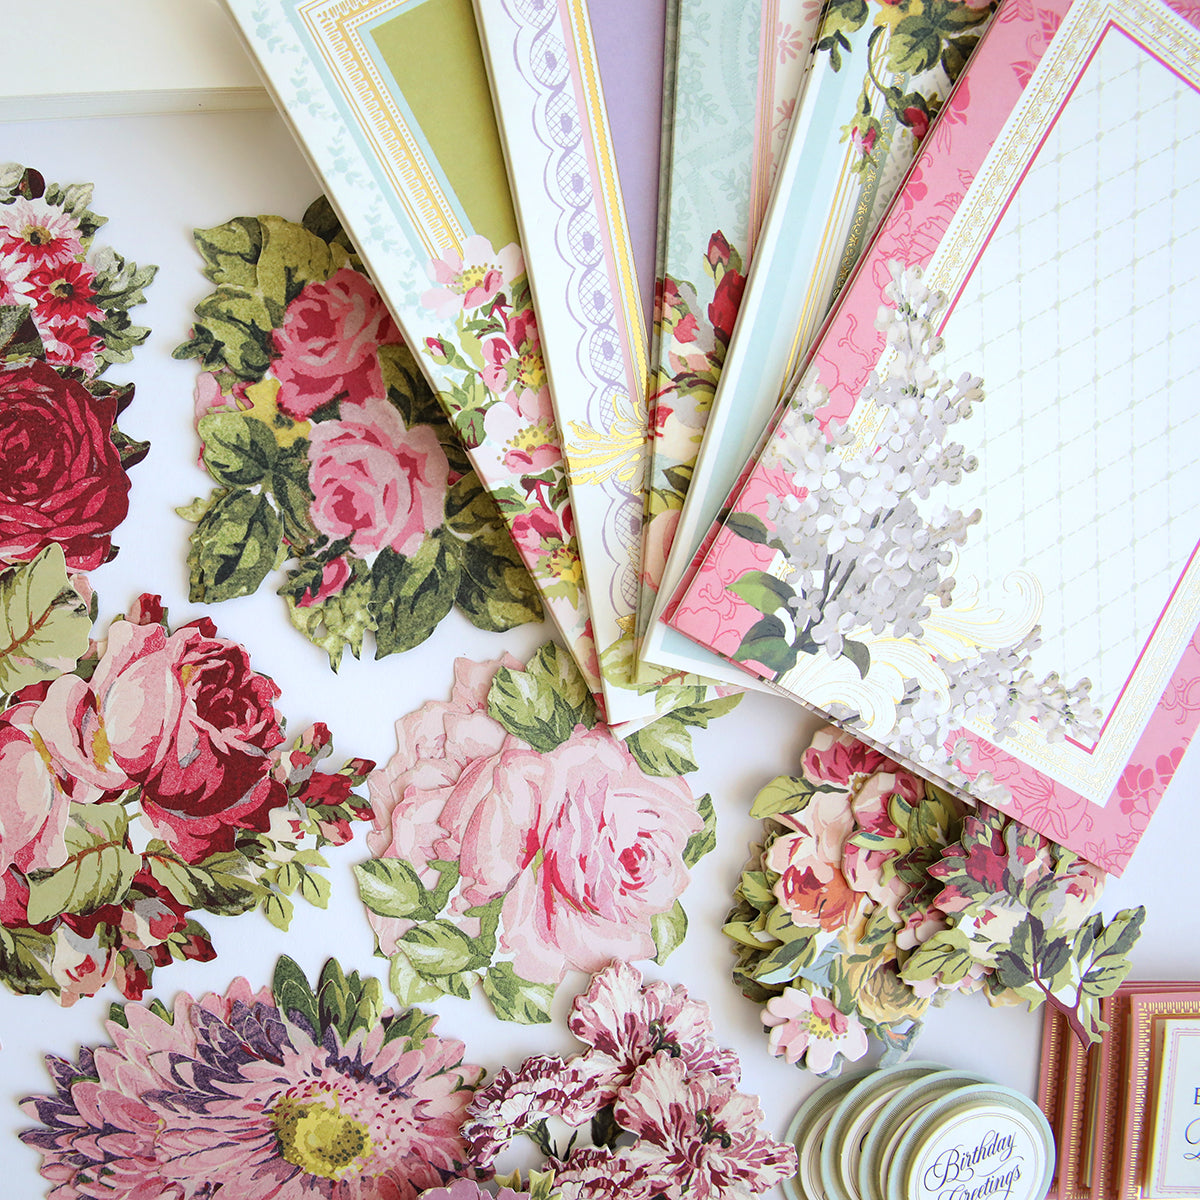 Various floral patterned scrapbooking papers and cut-out flowers from the Folded Flower Birthday Card Kit scattered on a white surface.